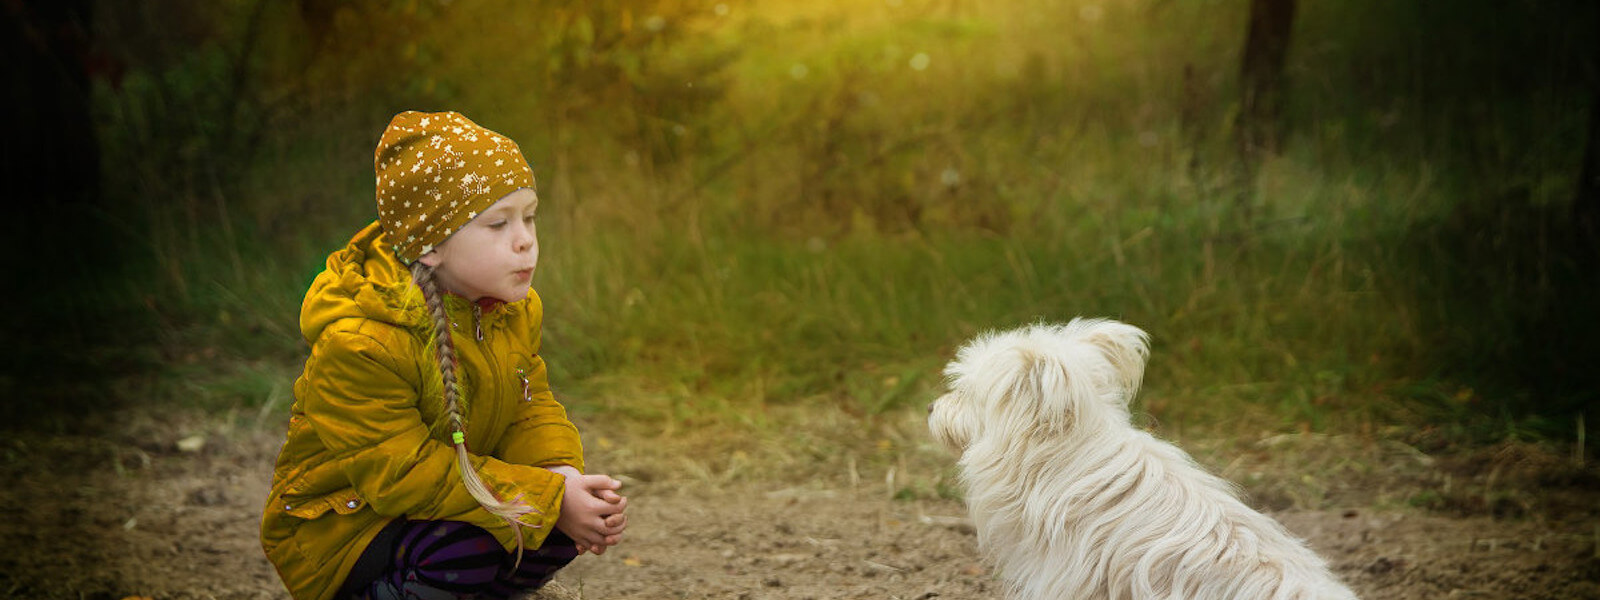 A little girl playing with a West Highland White Terrier